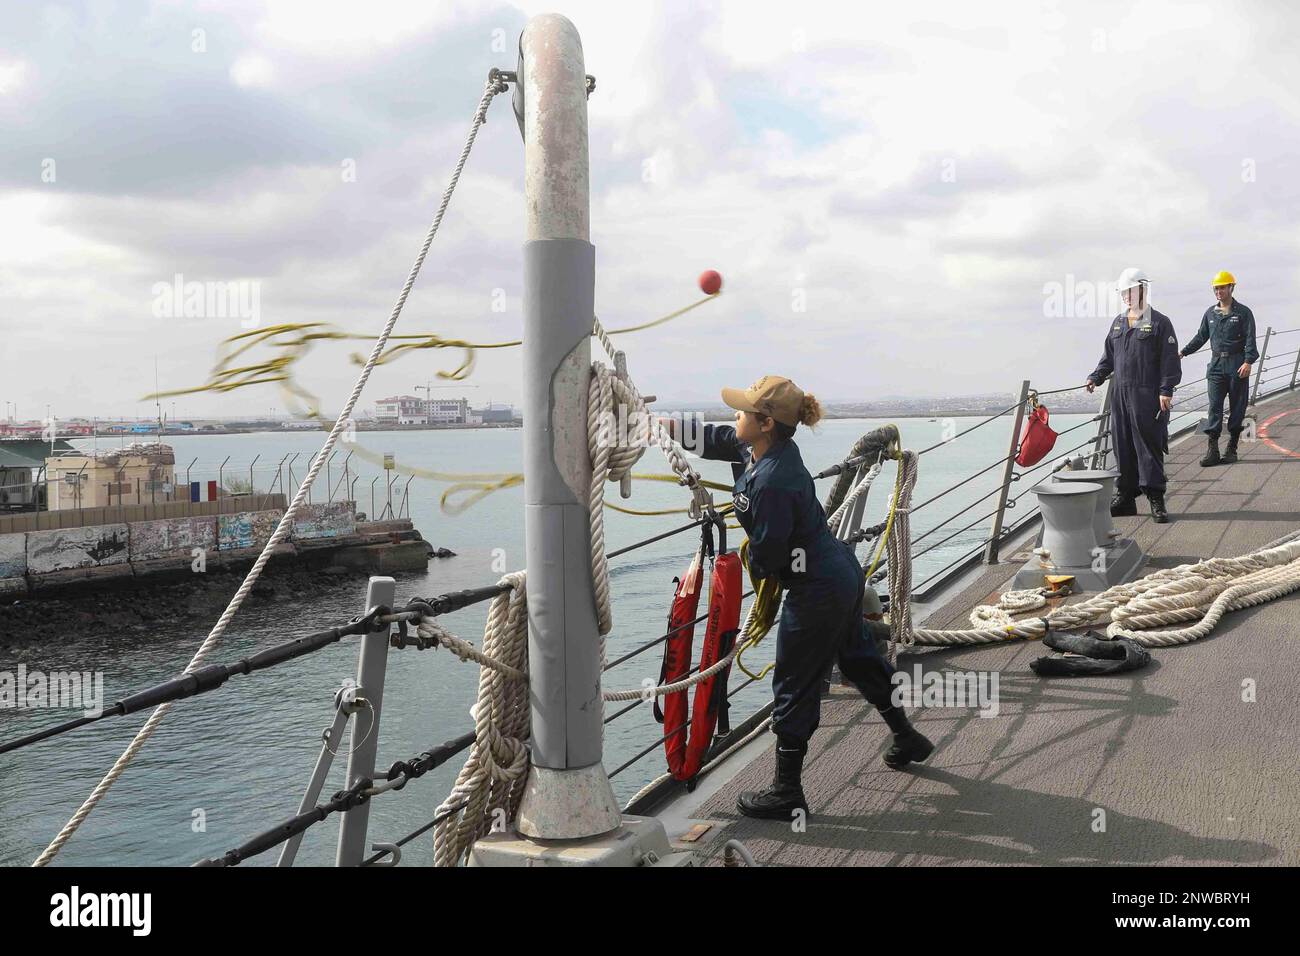 230204-N-JO162-1016 DJIBOUTI (Feb. 4, 2023) Retail Specialist 3rd Class Windy Martelo casts a line from the guided-missile destroyer USS Truxtun (DDG 103) in Djibouti, Feb. 4, 2023. Truxtun is deployed to the U.S. 5th Fleet area of operations to help ensure maritime security and stability in the Middle East region. Stock Photo